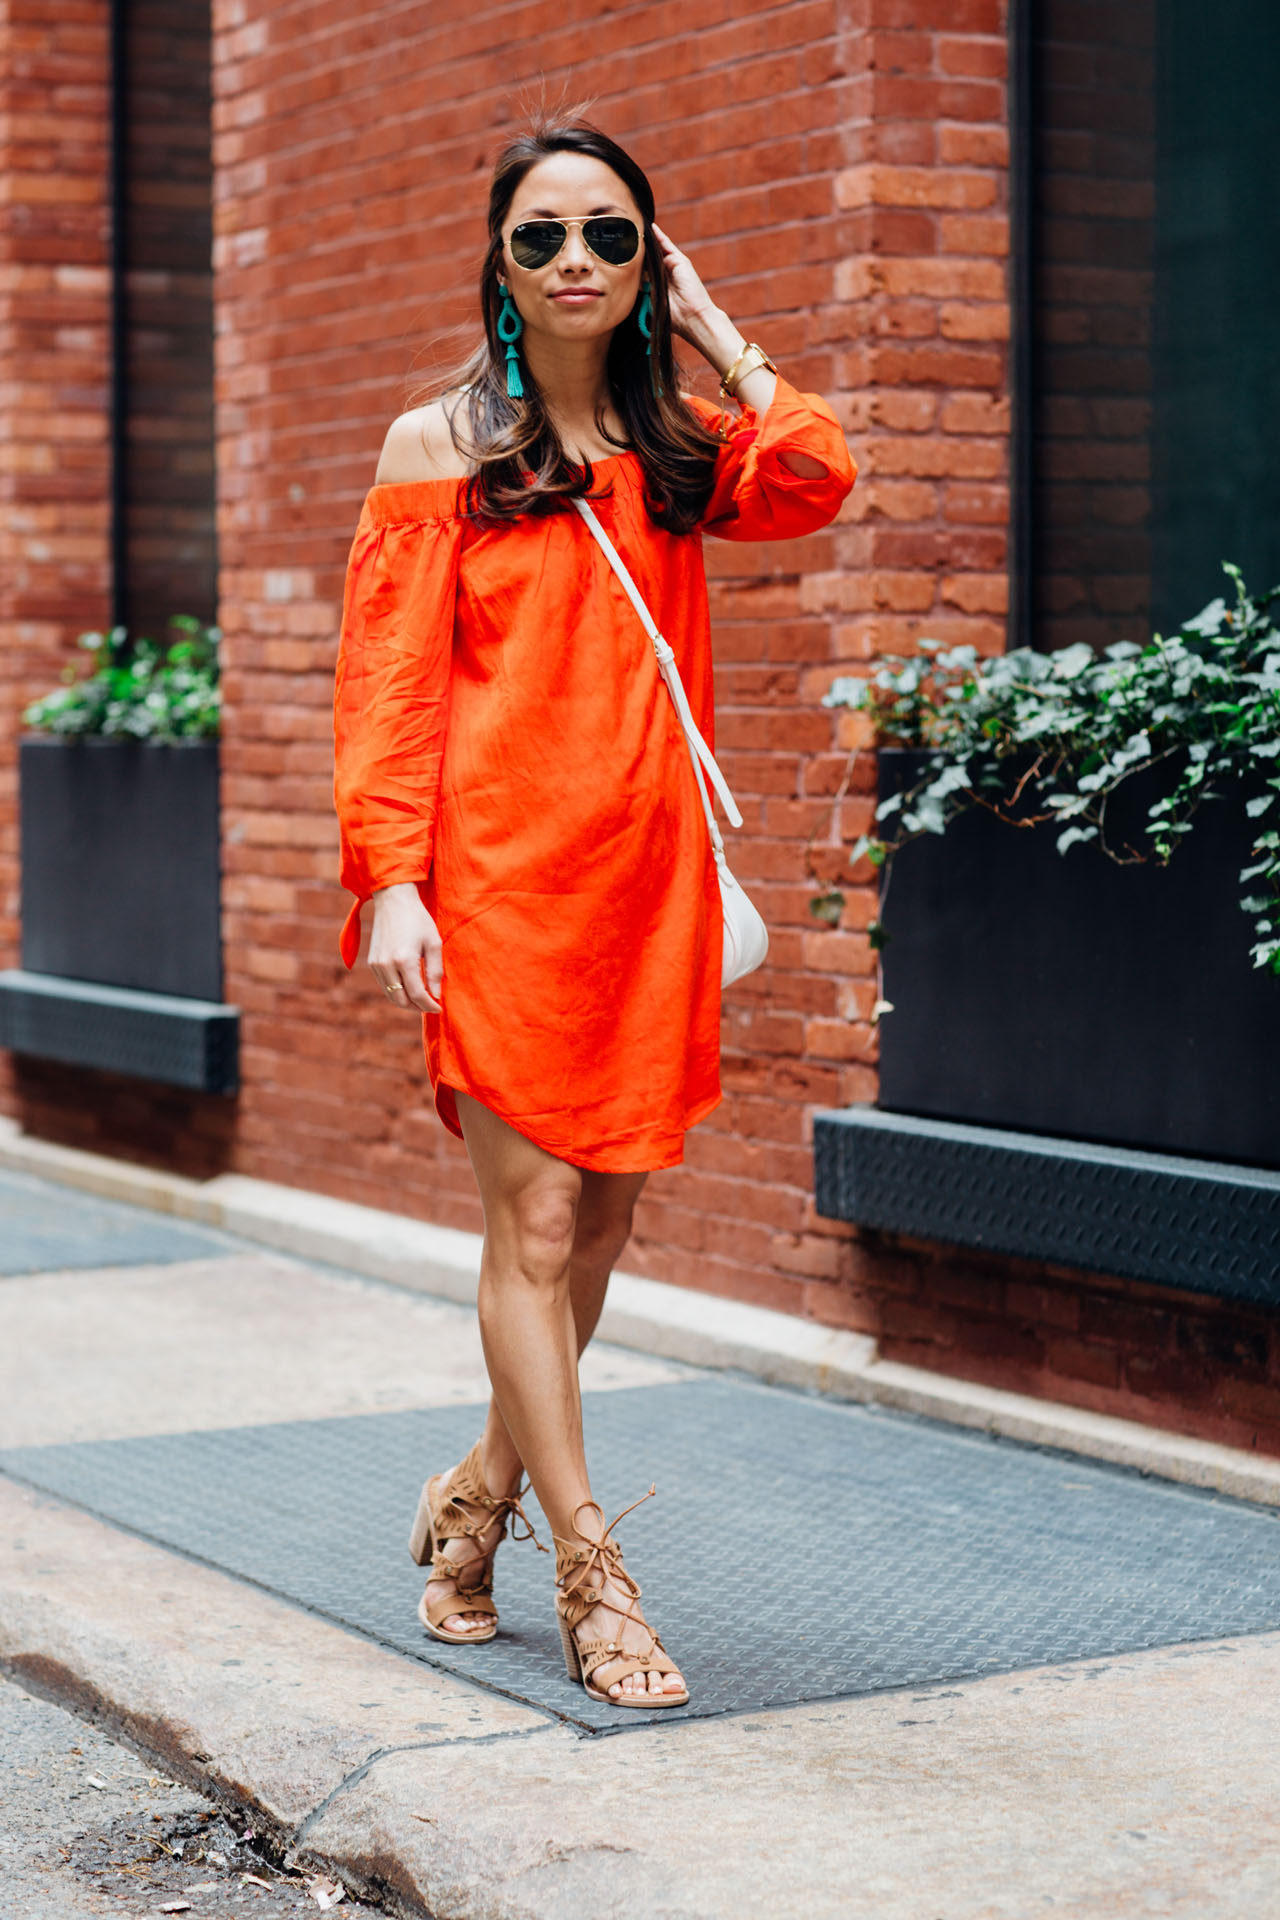 old navy havana collection, off the shoulder dress, petite bloggers, petite dresses, the view from 5 ft. 2, christine petric